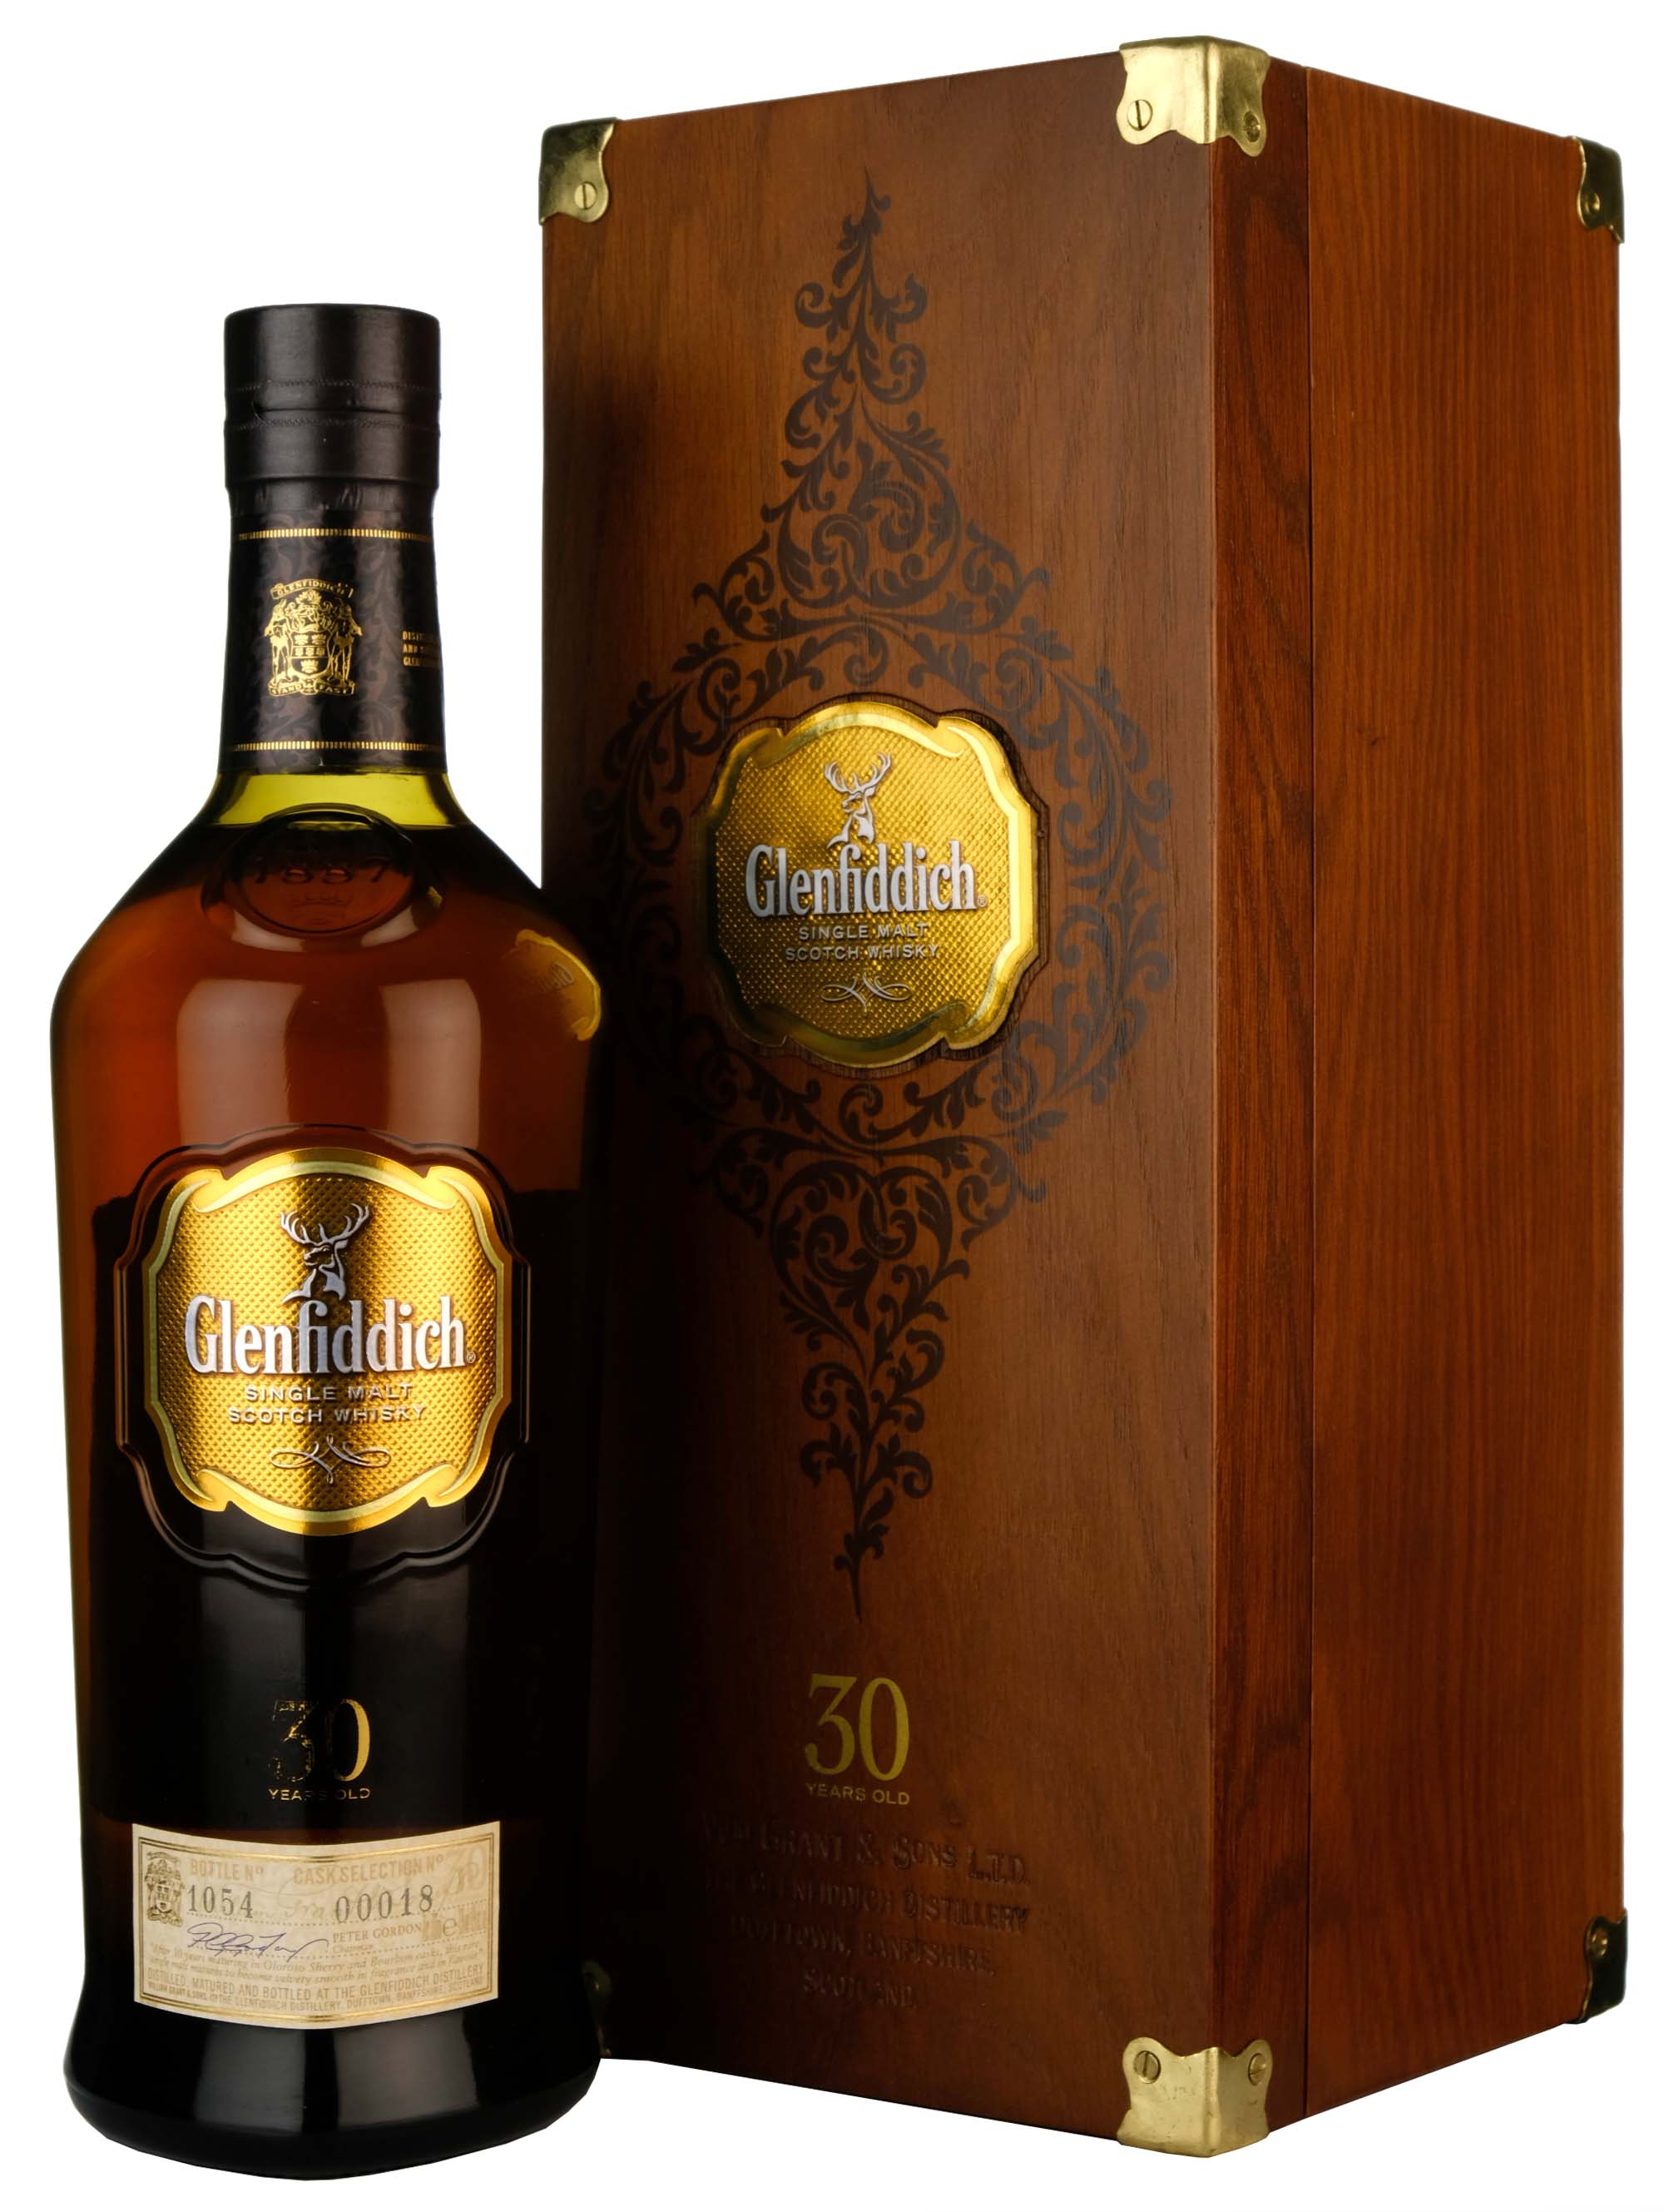 Glenfiddich 30 Year Old Cask Selection 00018